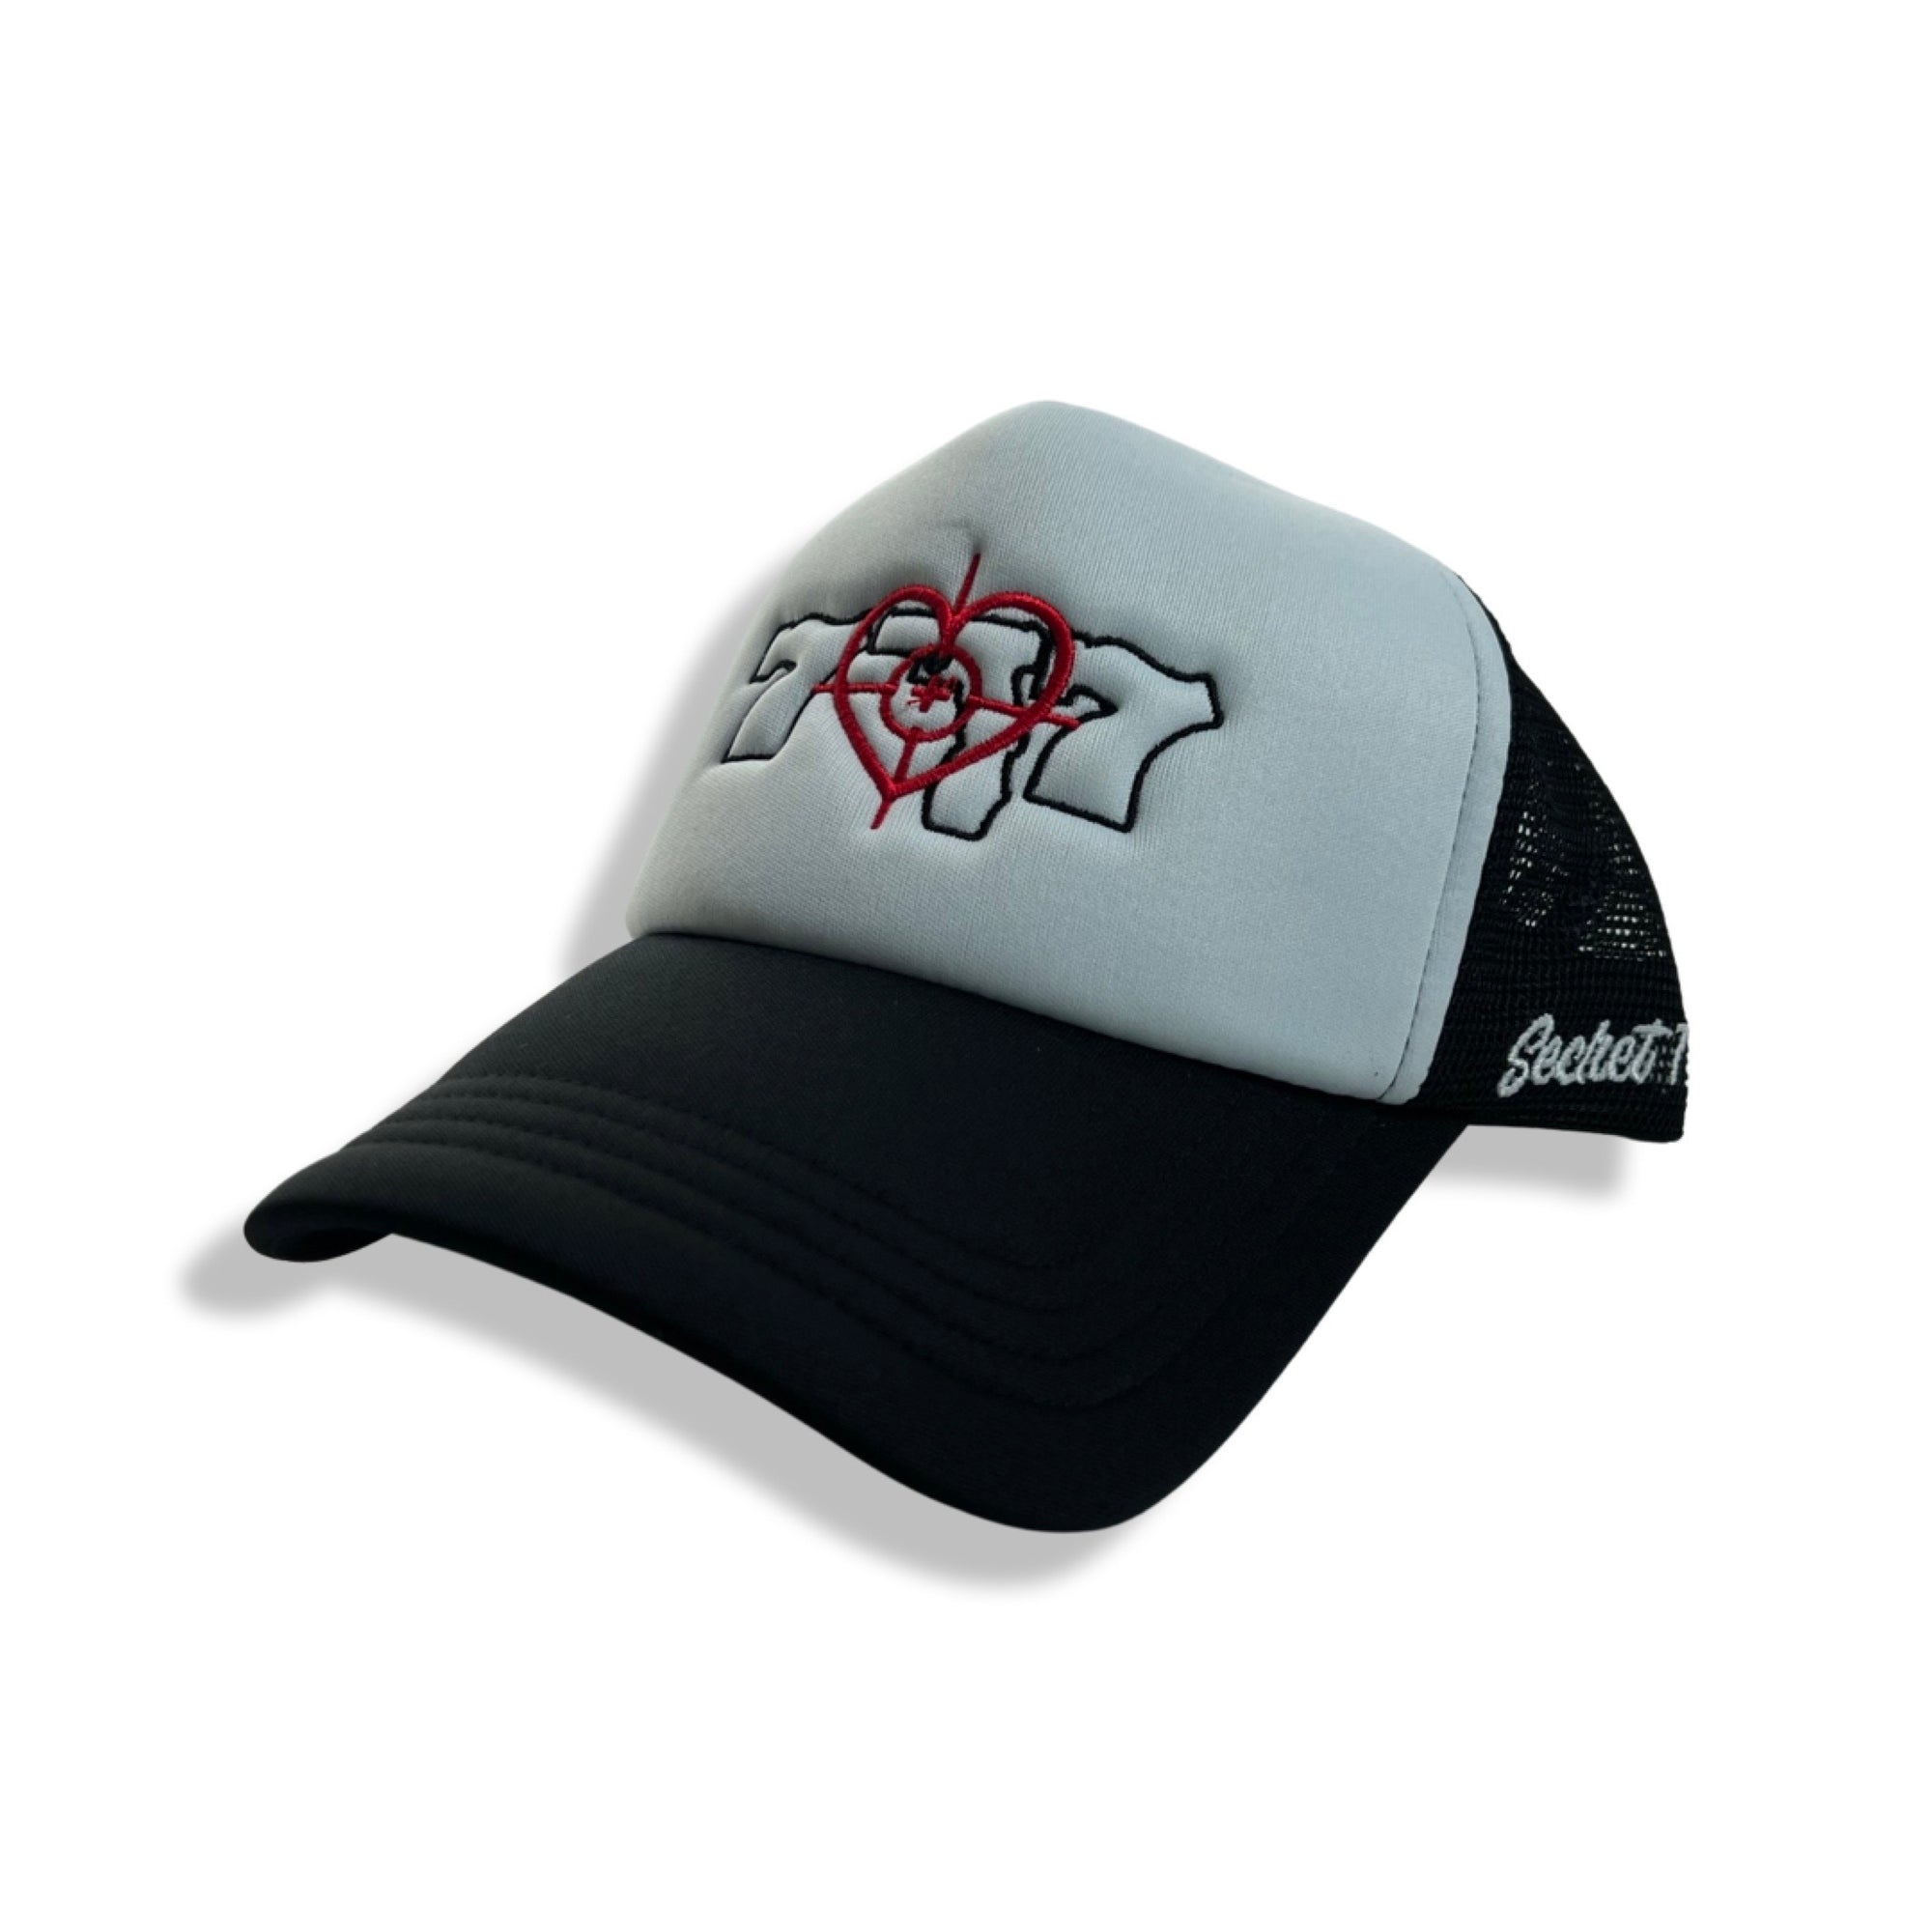 Black and White 777 Trucker Hat (Red Cross Hairs)